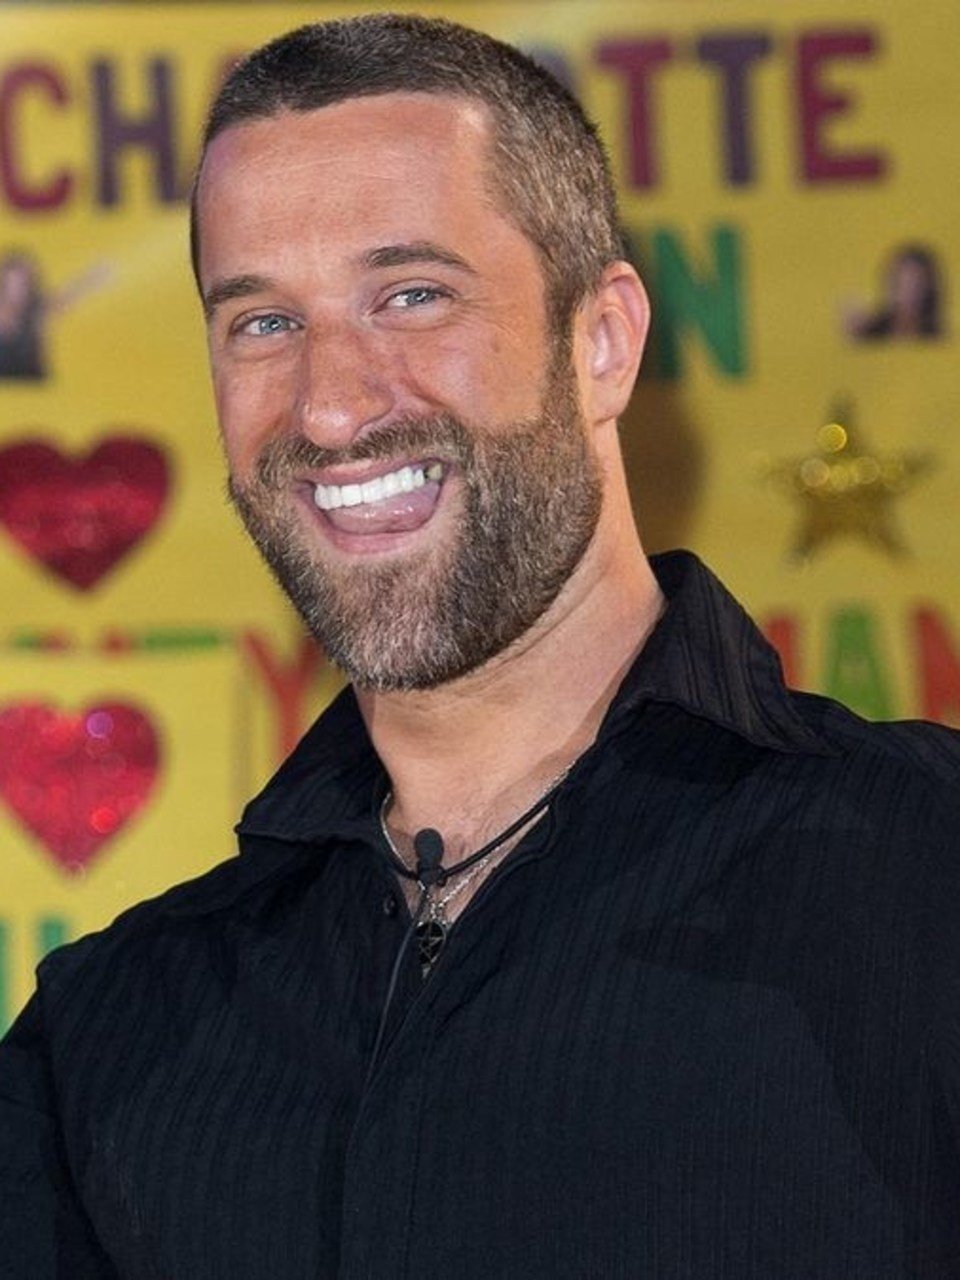 Dustin Diamond was confirmed to be battling cancer on January 15, 2021. | Photo: Facebook/DustinDiamond.